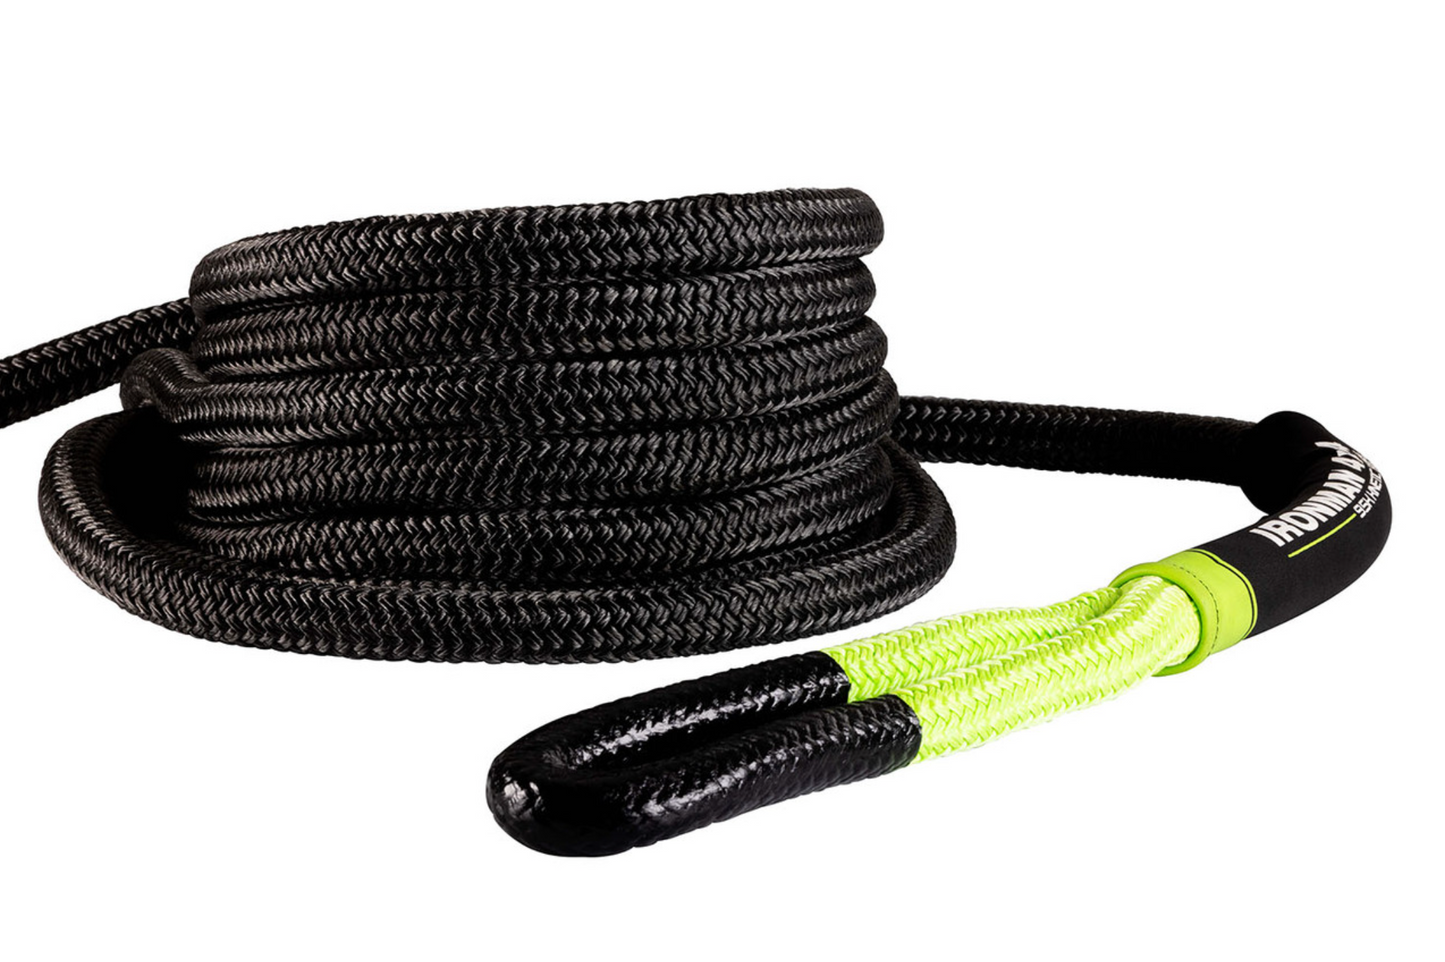 IRONMAN 4x4 KINETIC RECOVERY ROPE 20,900 LBS